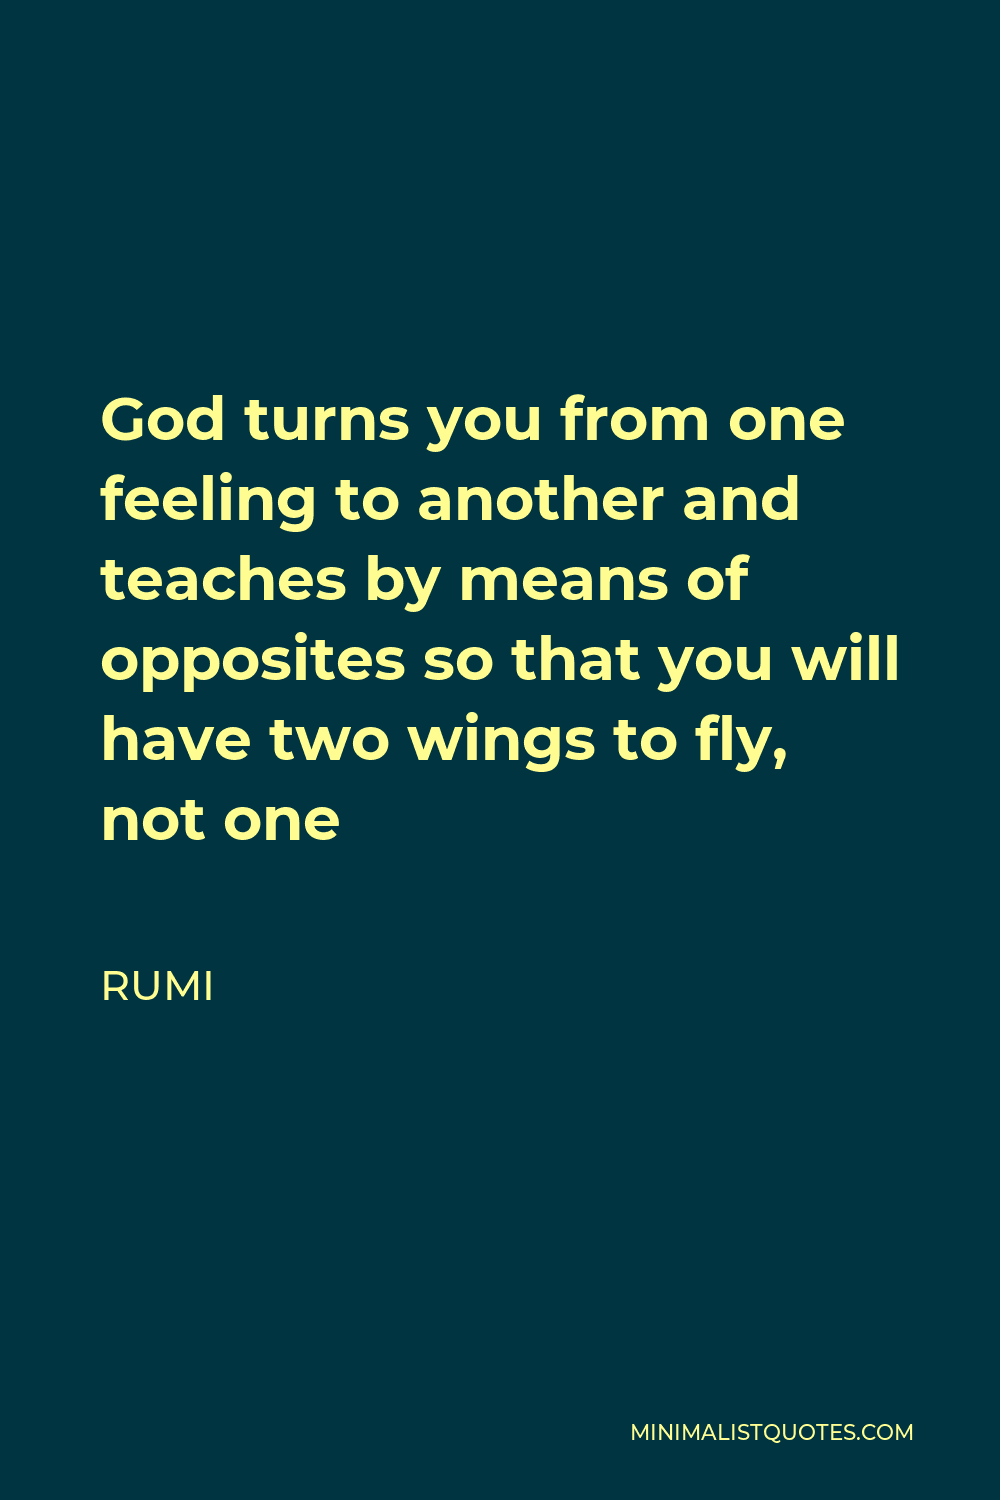 Rumi Quote - God turns you from one feeling to another and teaches by means of opposites so that you will have two wings to fly, not one